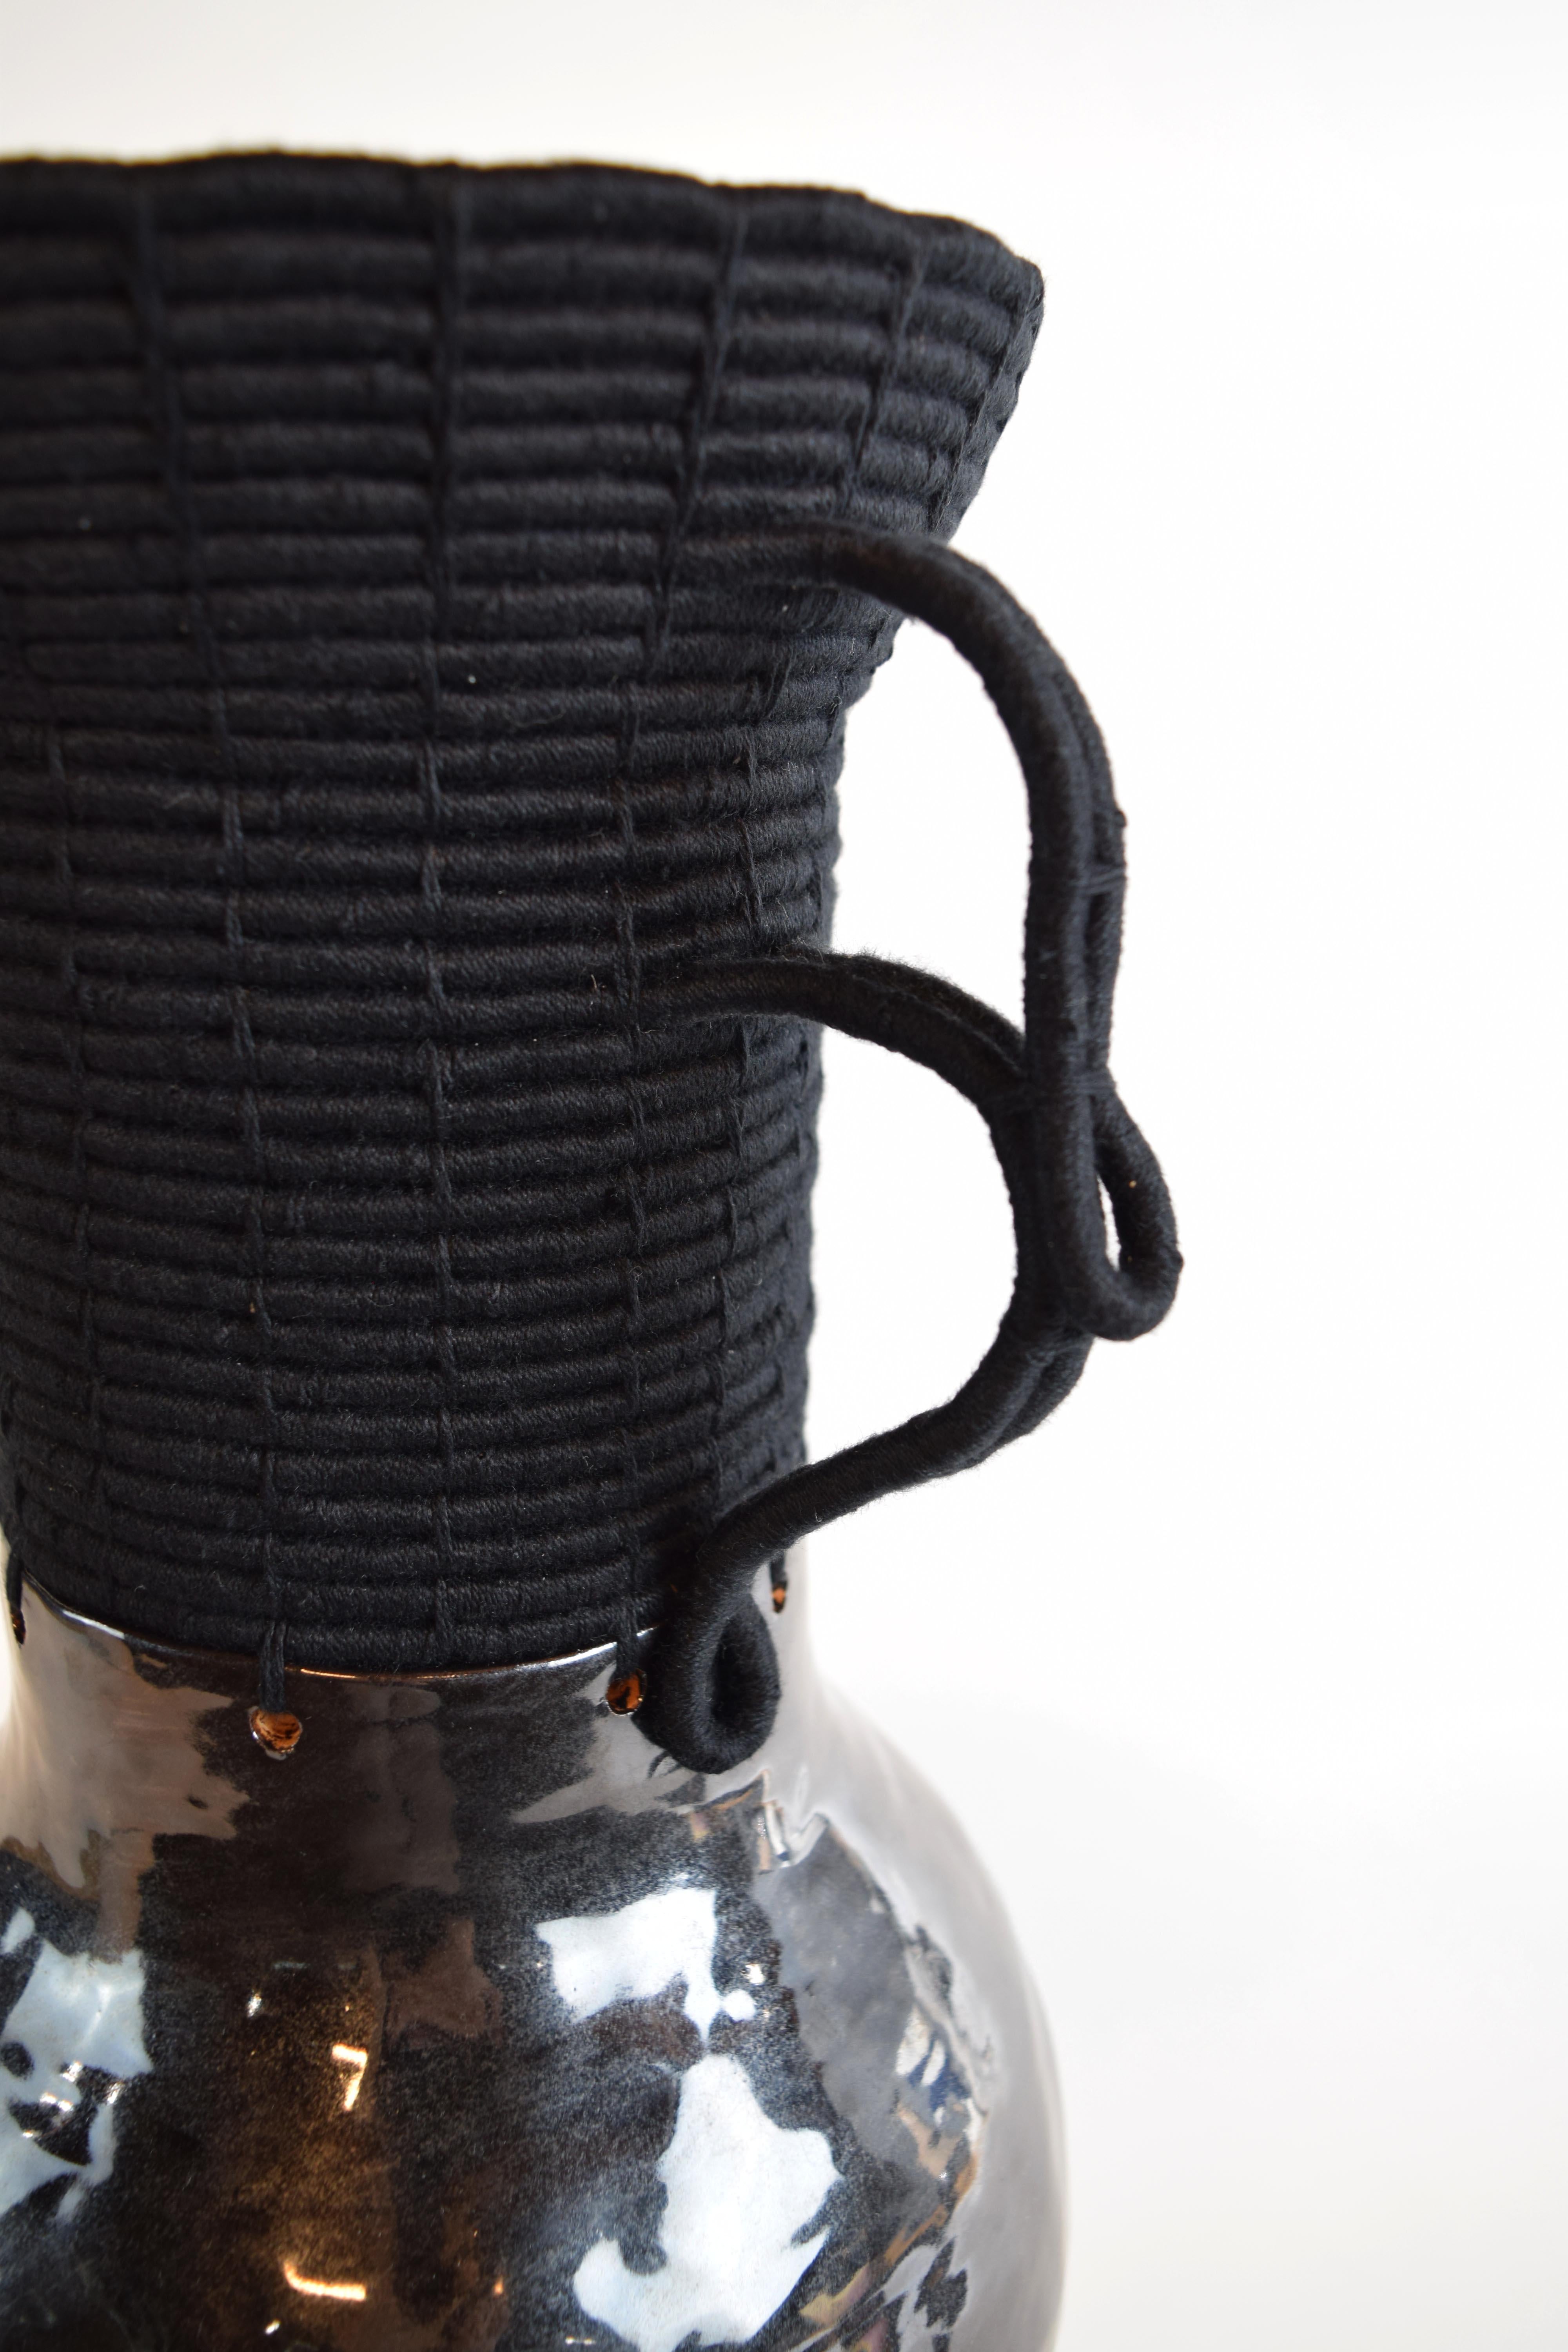 Hand-Crafted One of a Kind Vessel #752, Hand Formed Black Ceramic and Woven Black Cotton